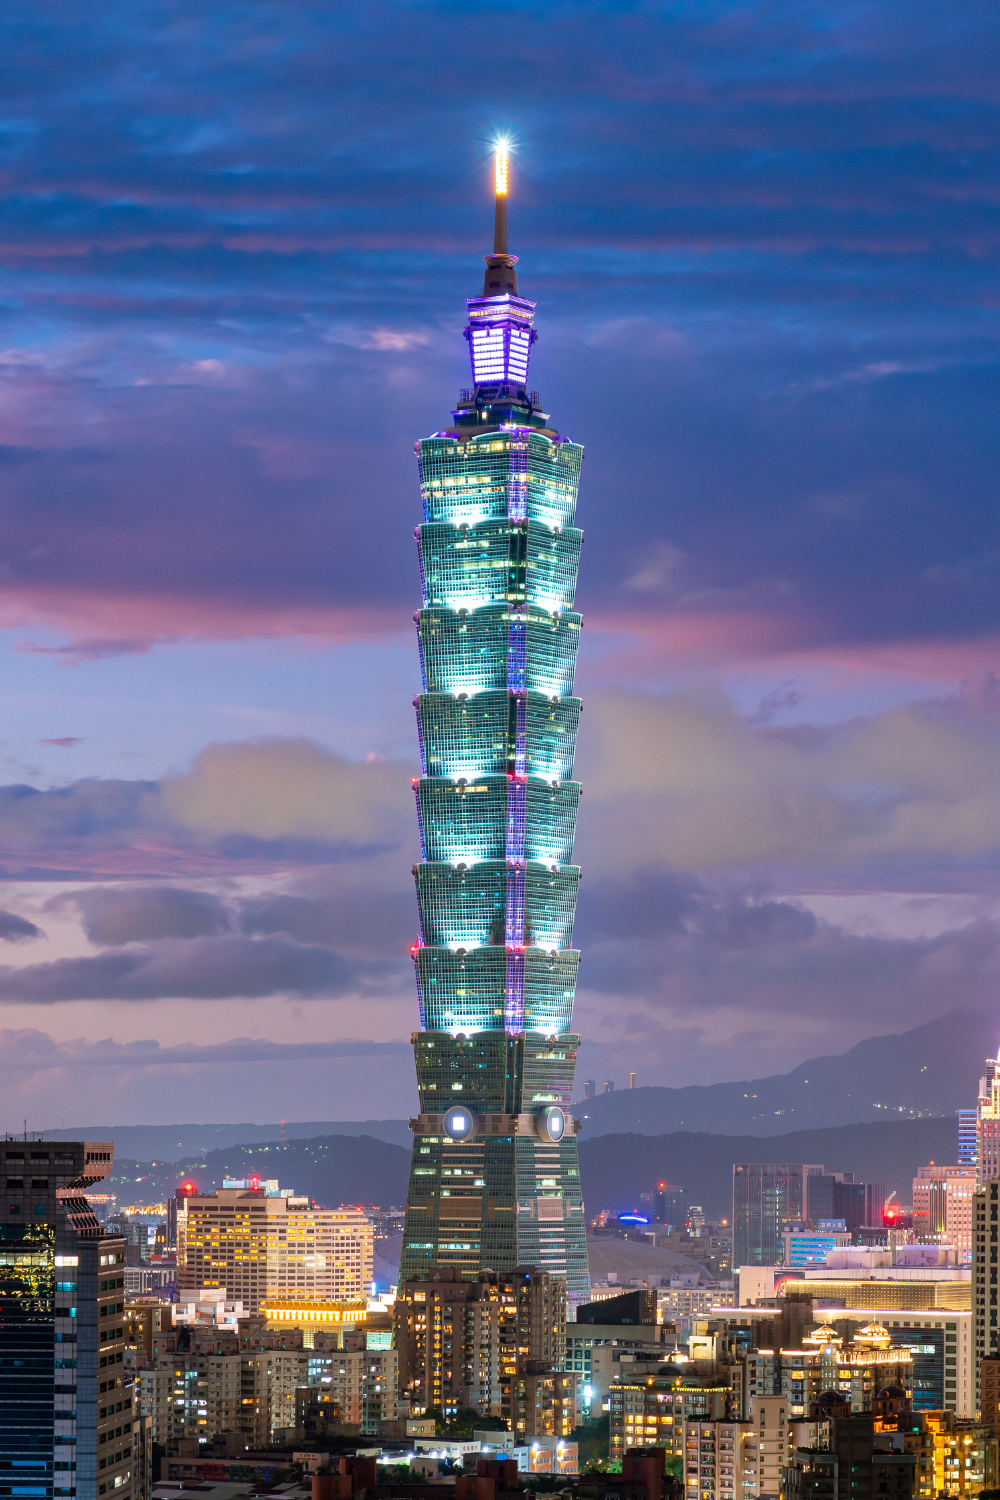 Tower in Taipei, Taiwan light up at dusk